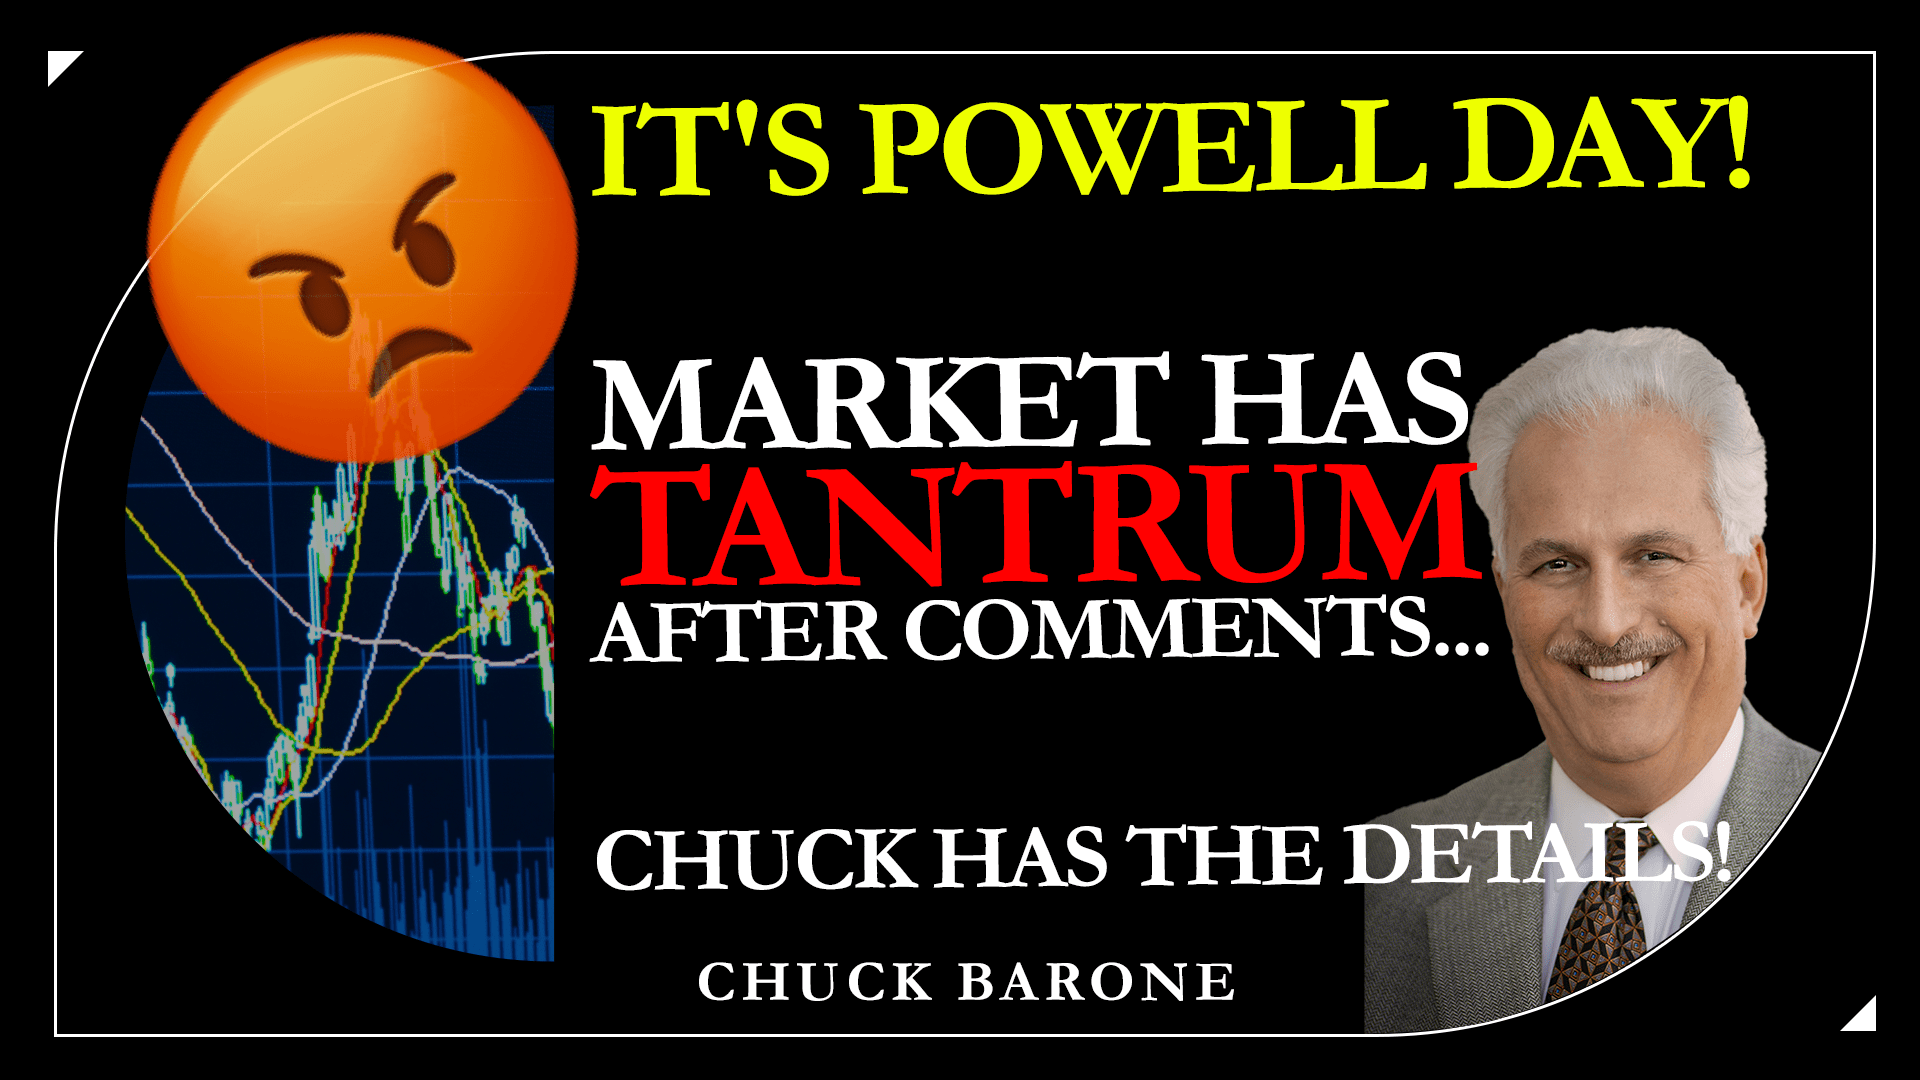 Featured image for “It’s POWELL DAY! Market has TANTRUM after comments… Chuck has the details!”